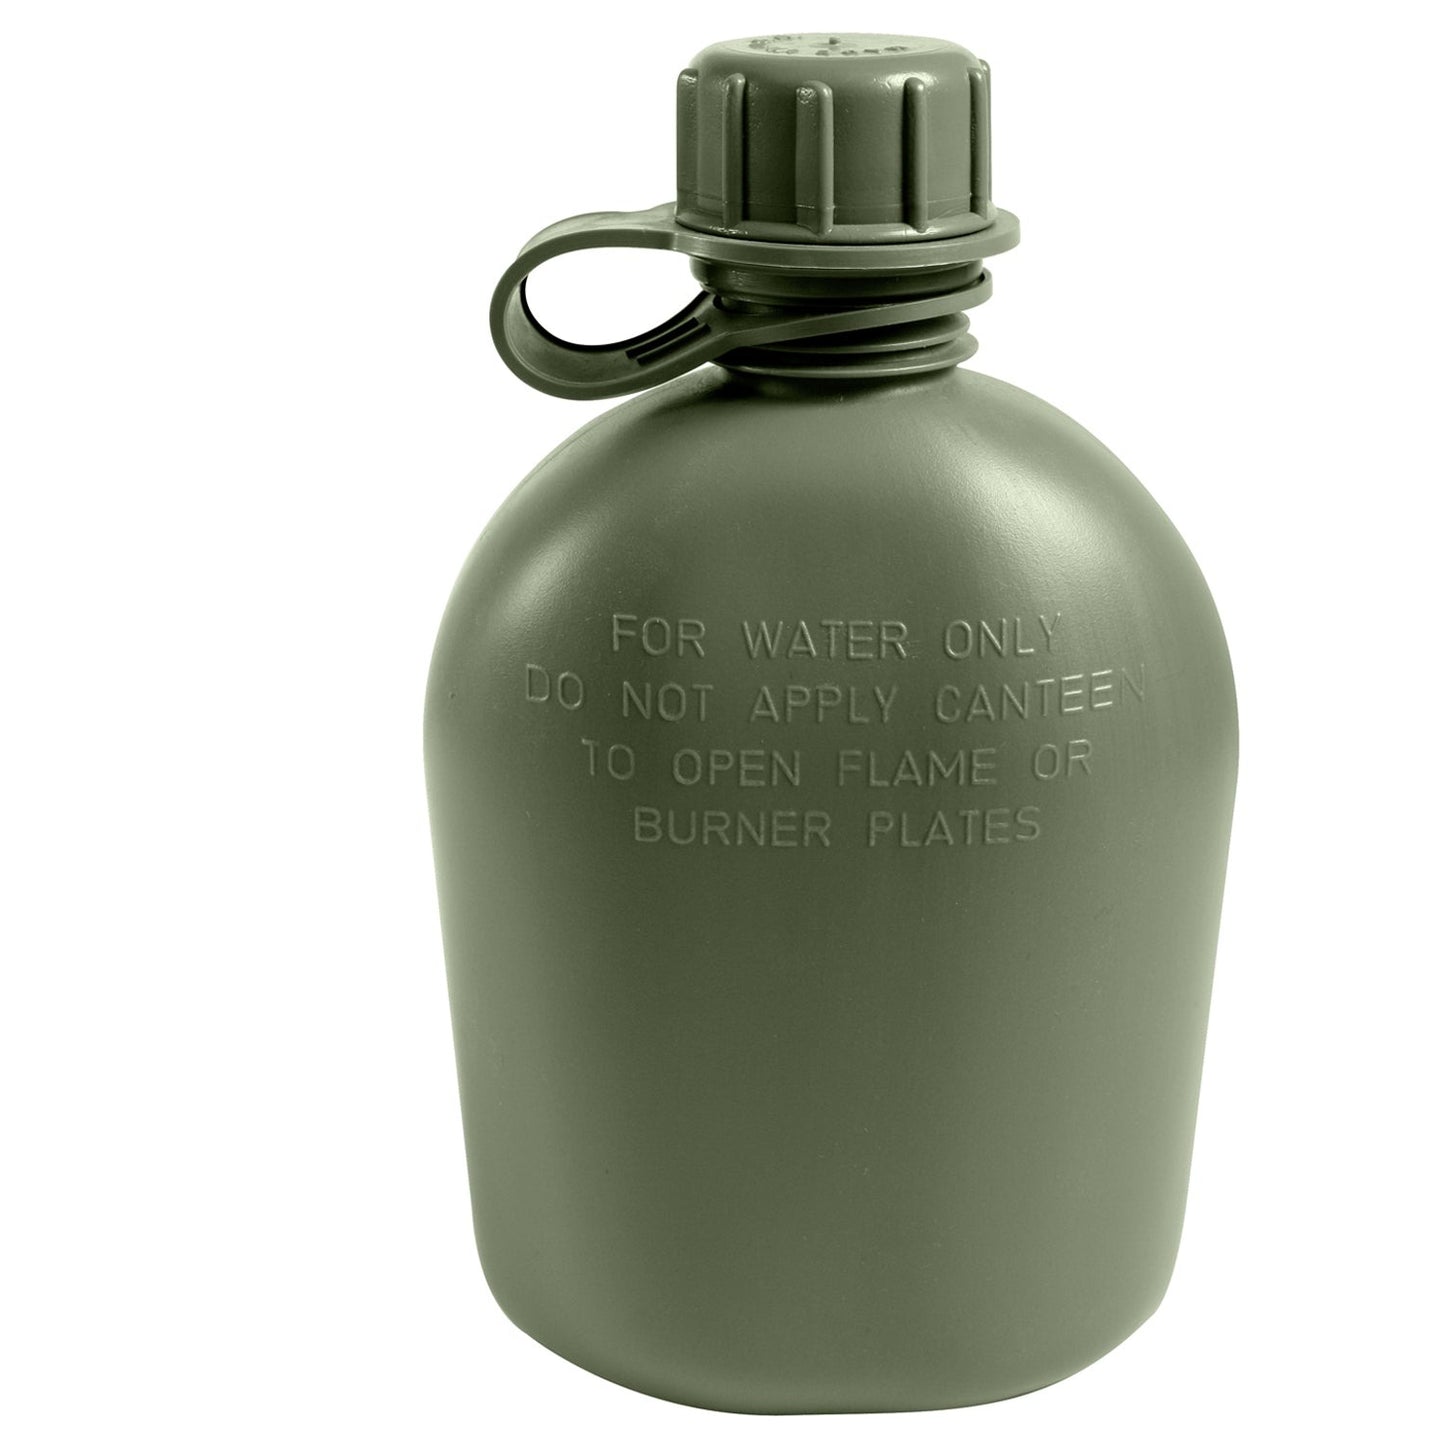 Genuine G.I. 3 Piece 1 Quart Plastic Canteens are BPA Free and made of high-density polyethylene and will fit into any G.I Style canteen cover. BPA Free